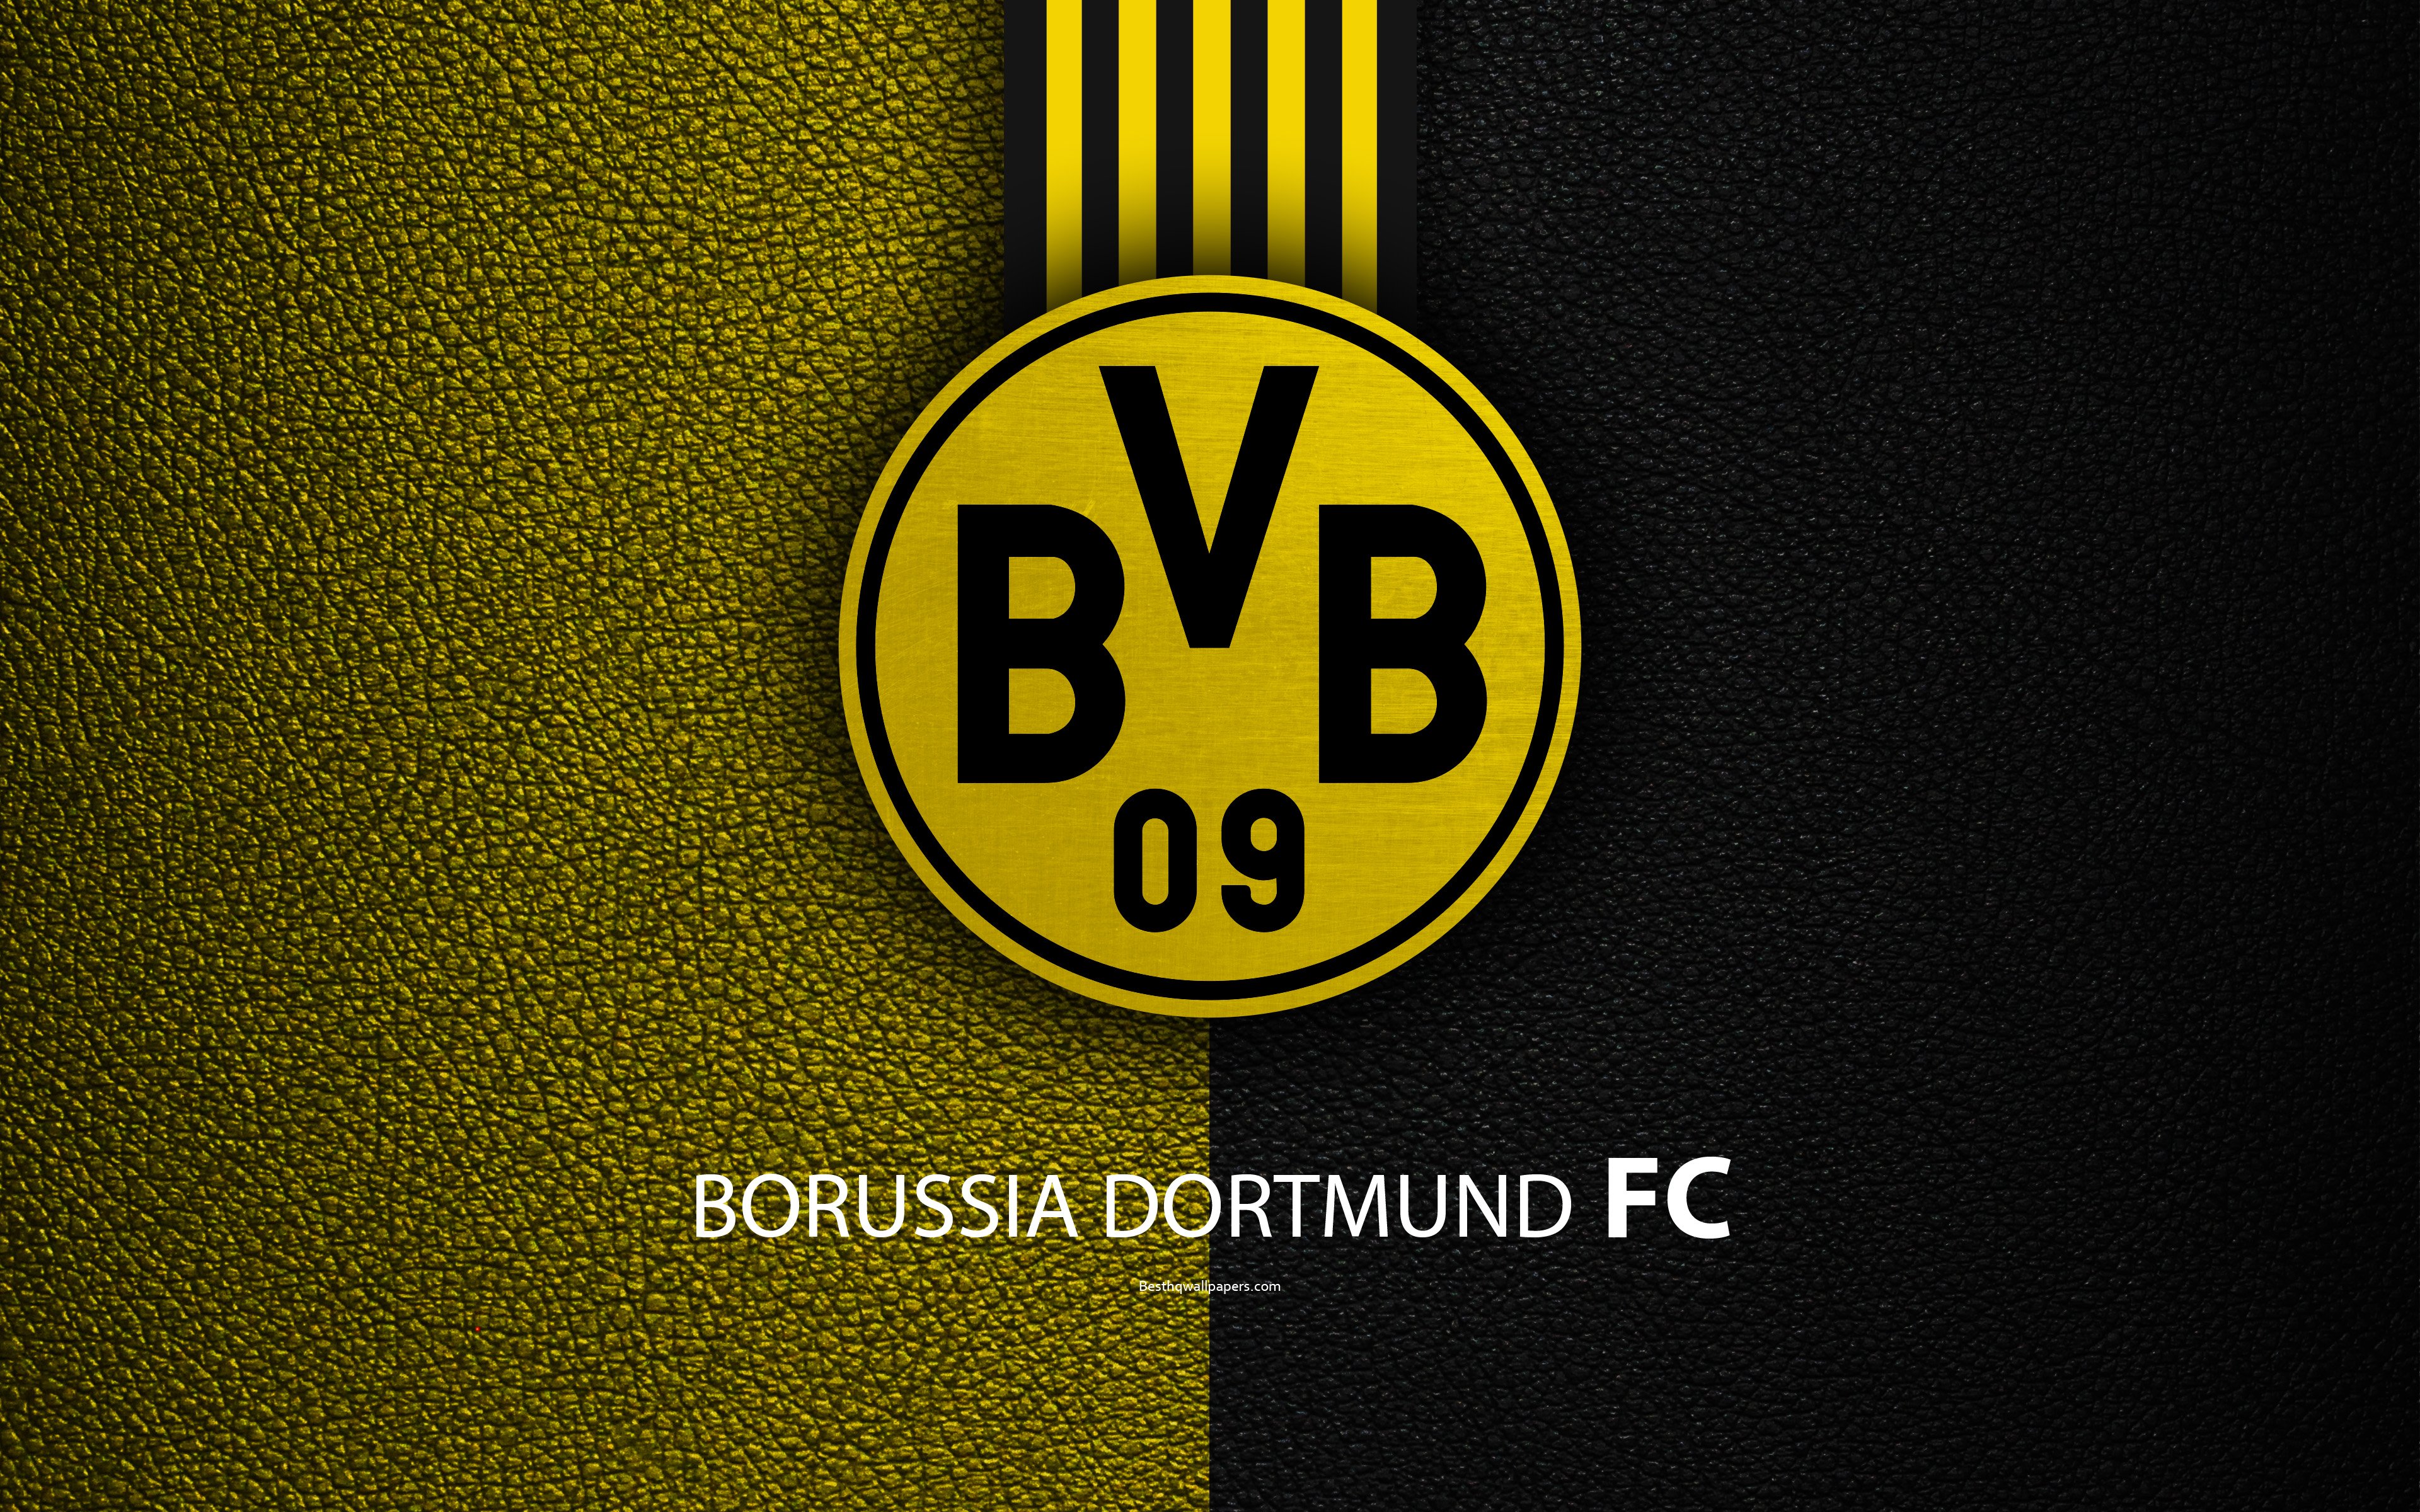 Download wallpaper Borussia Dortmund FC, 4k, German football club, Bundesliga, leather texture, emblem, BVB logo, Dortmund, Germany, German Football Championships for desktop with resolution 3840x2400. High Quality HD picture wallpaper